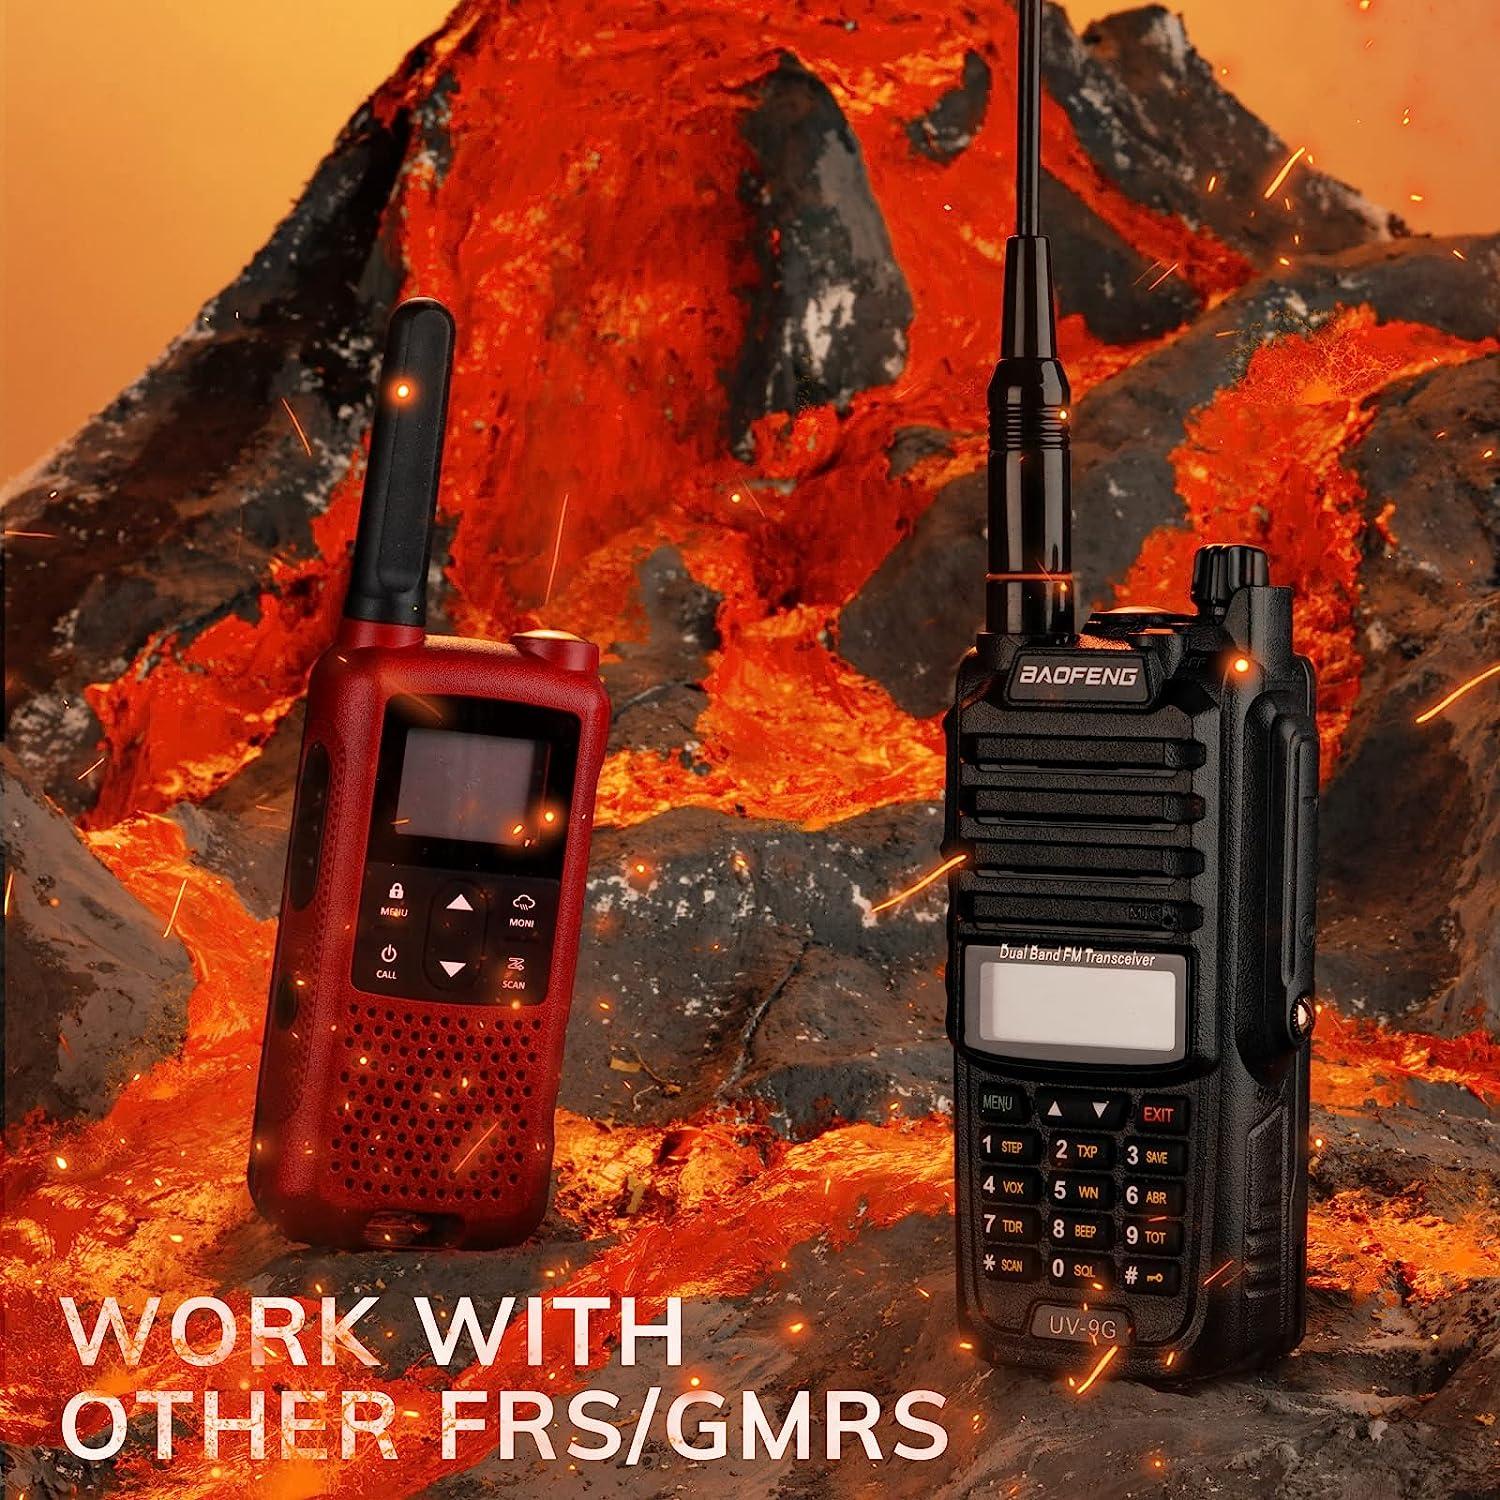 GMRS Radio Baofeng Walkie Talkies for Adults Long Range 2 Way Radio  Waterproof MP31 Rechargeable Walkie Talkies with NOAA,GMRS Repeater Capable  and